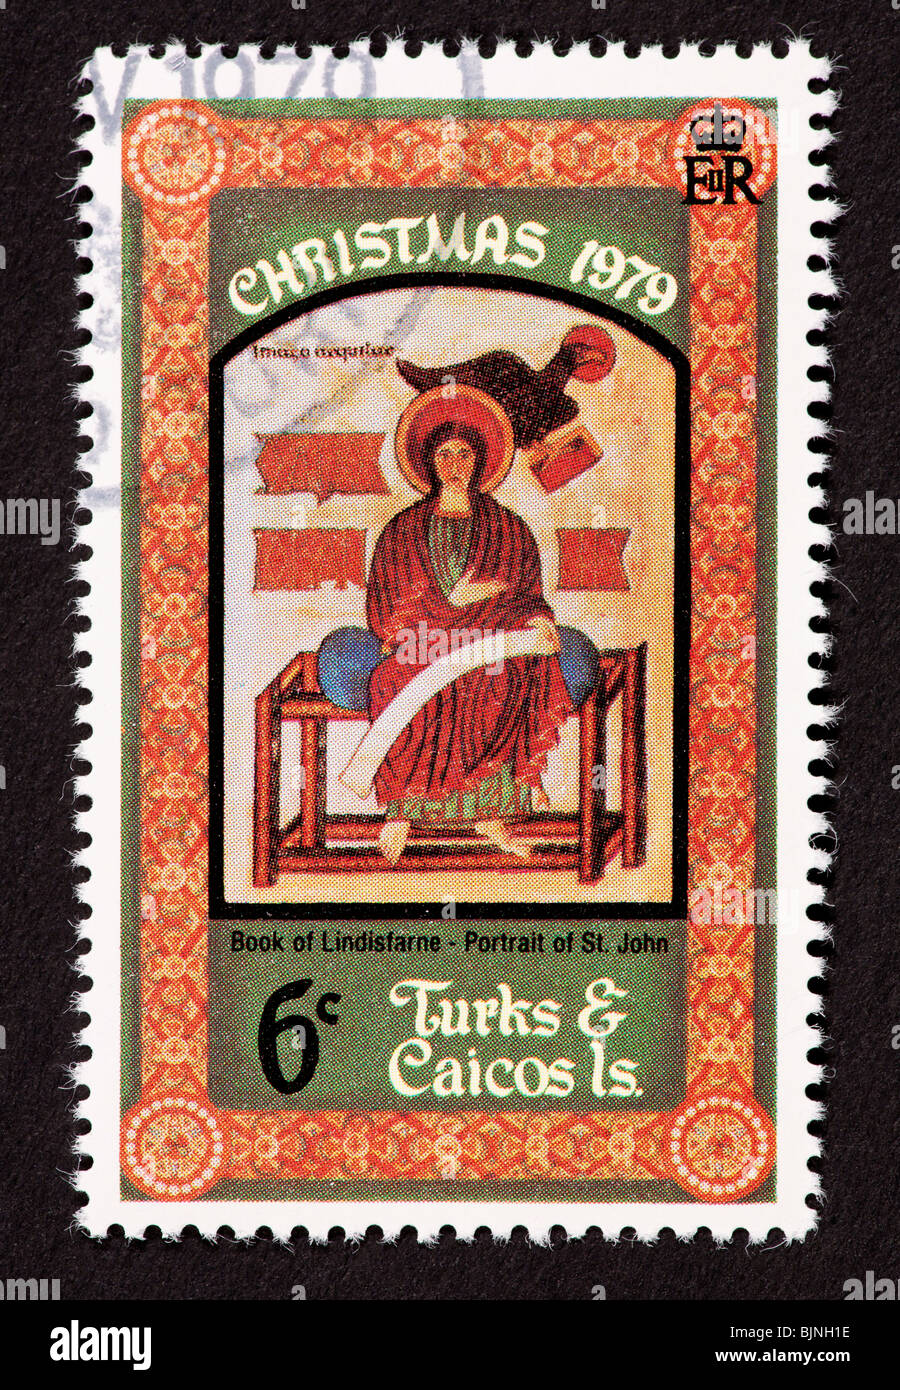 Postage stamp from Turks and Caicos Islands depicting Saint John (from the Book of Lindisfarne). Stock Photo